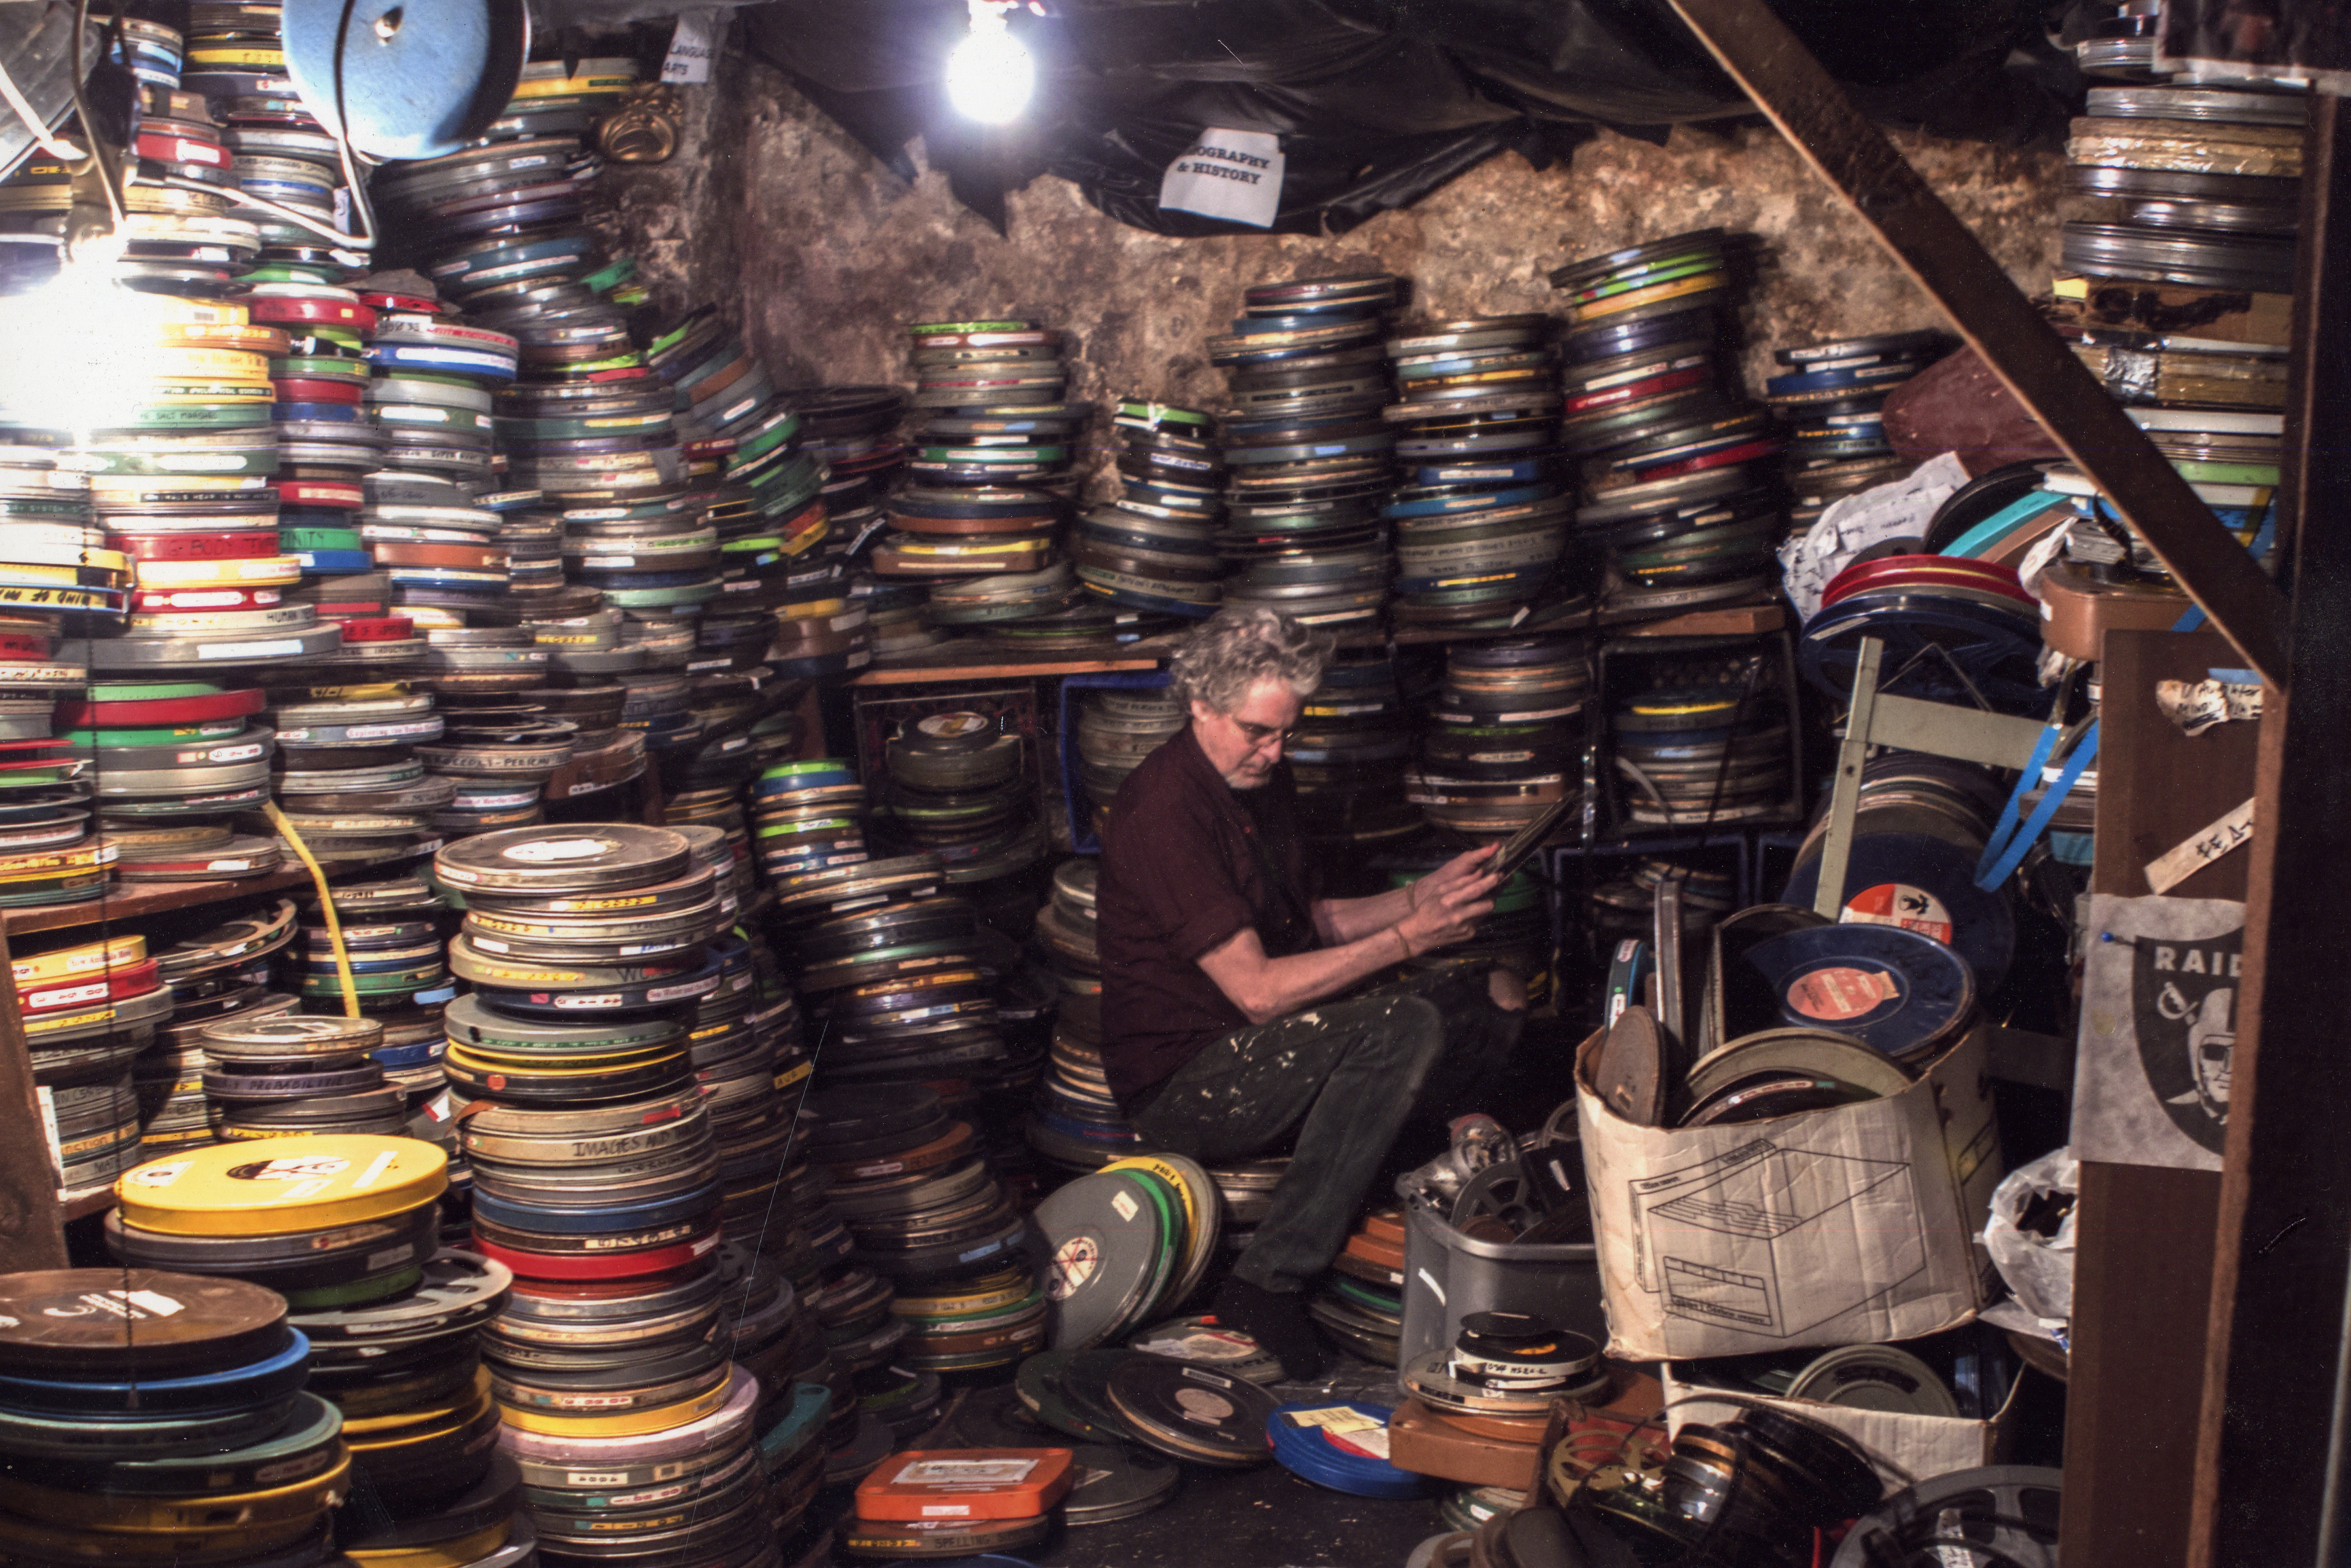 Filmmaker Craig Baldwin surrounded by cans of film reels